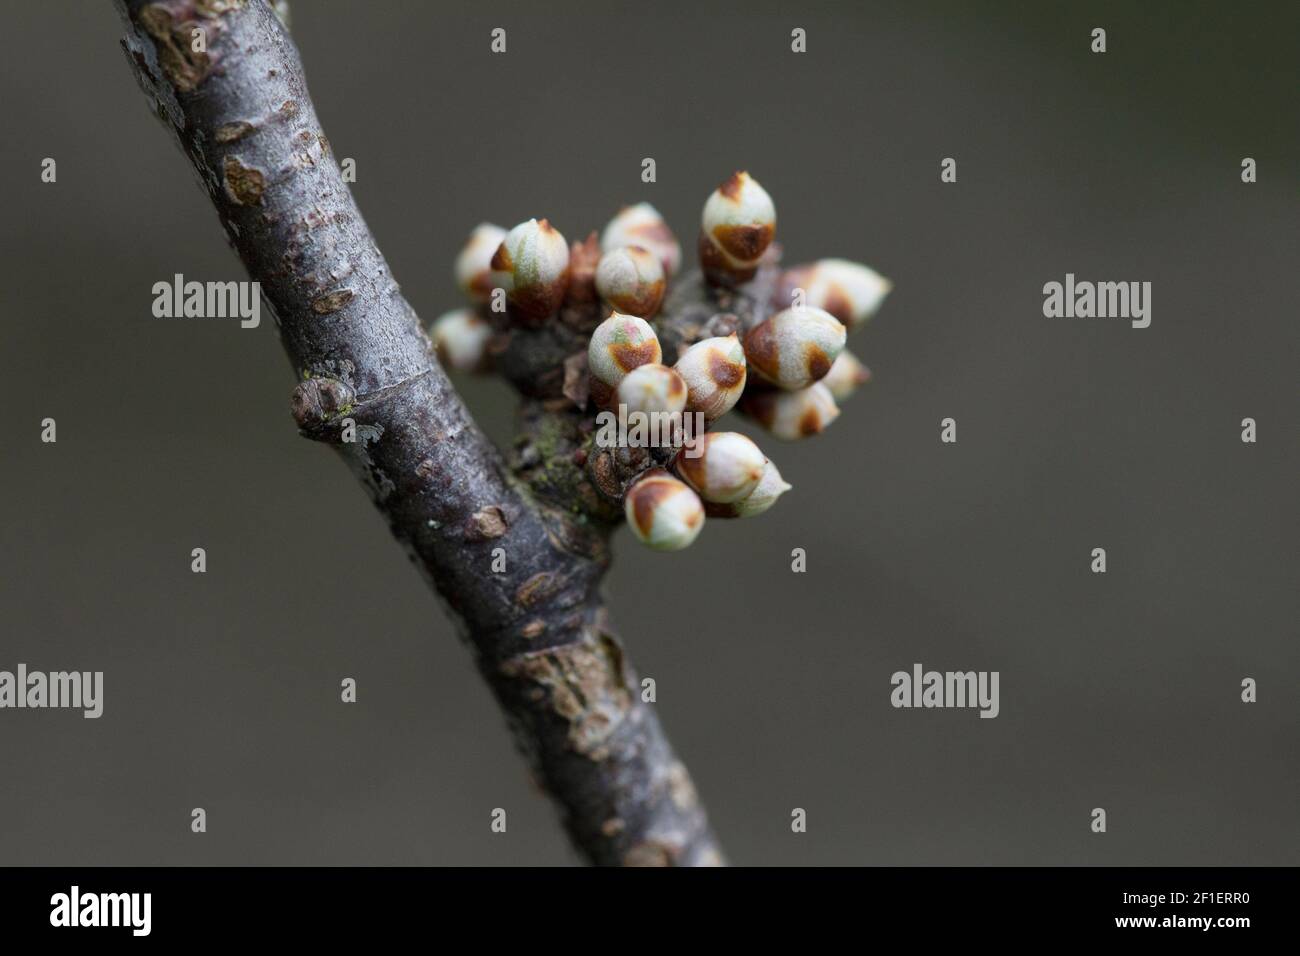 Blackthorn (sloe) (Prunus spinosa) hedge in early March, with blossom buds about to burst into flower (United Kingdom) Stock Photo